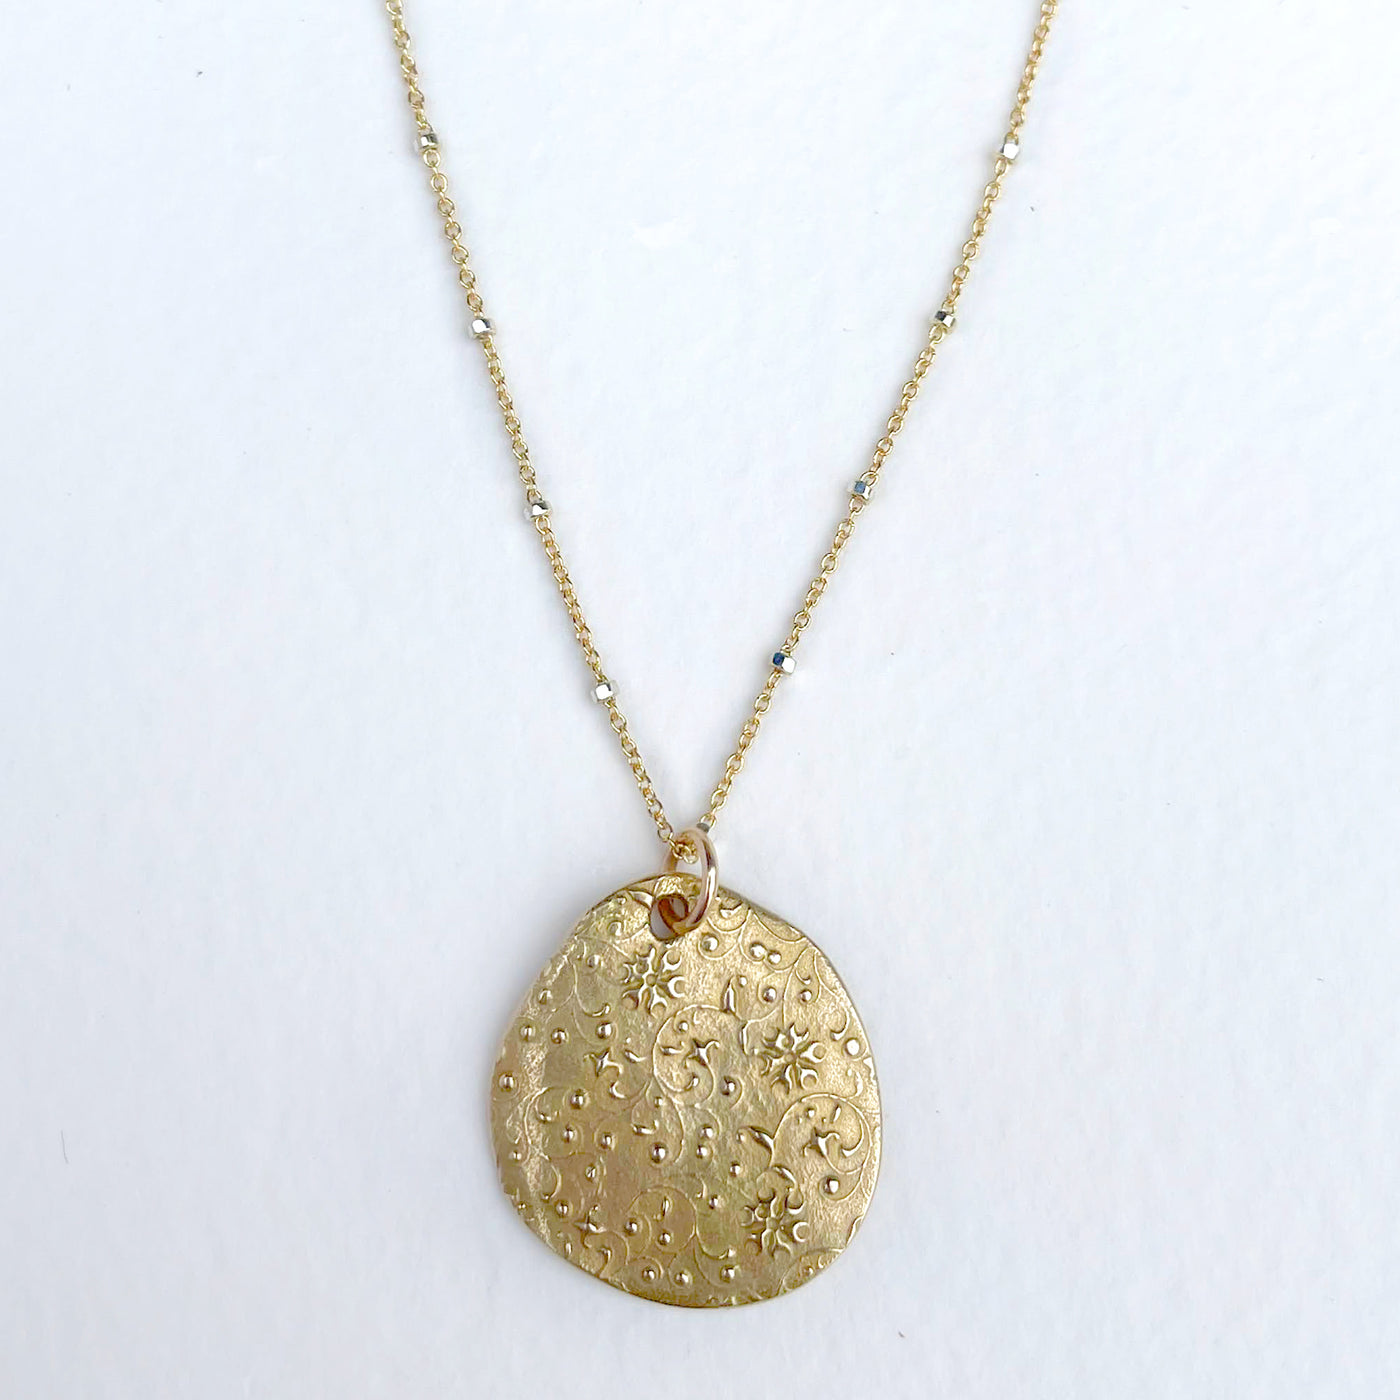 Limited Edition Wildflower Necklace | Bronze & Mixed Metal Chain